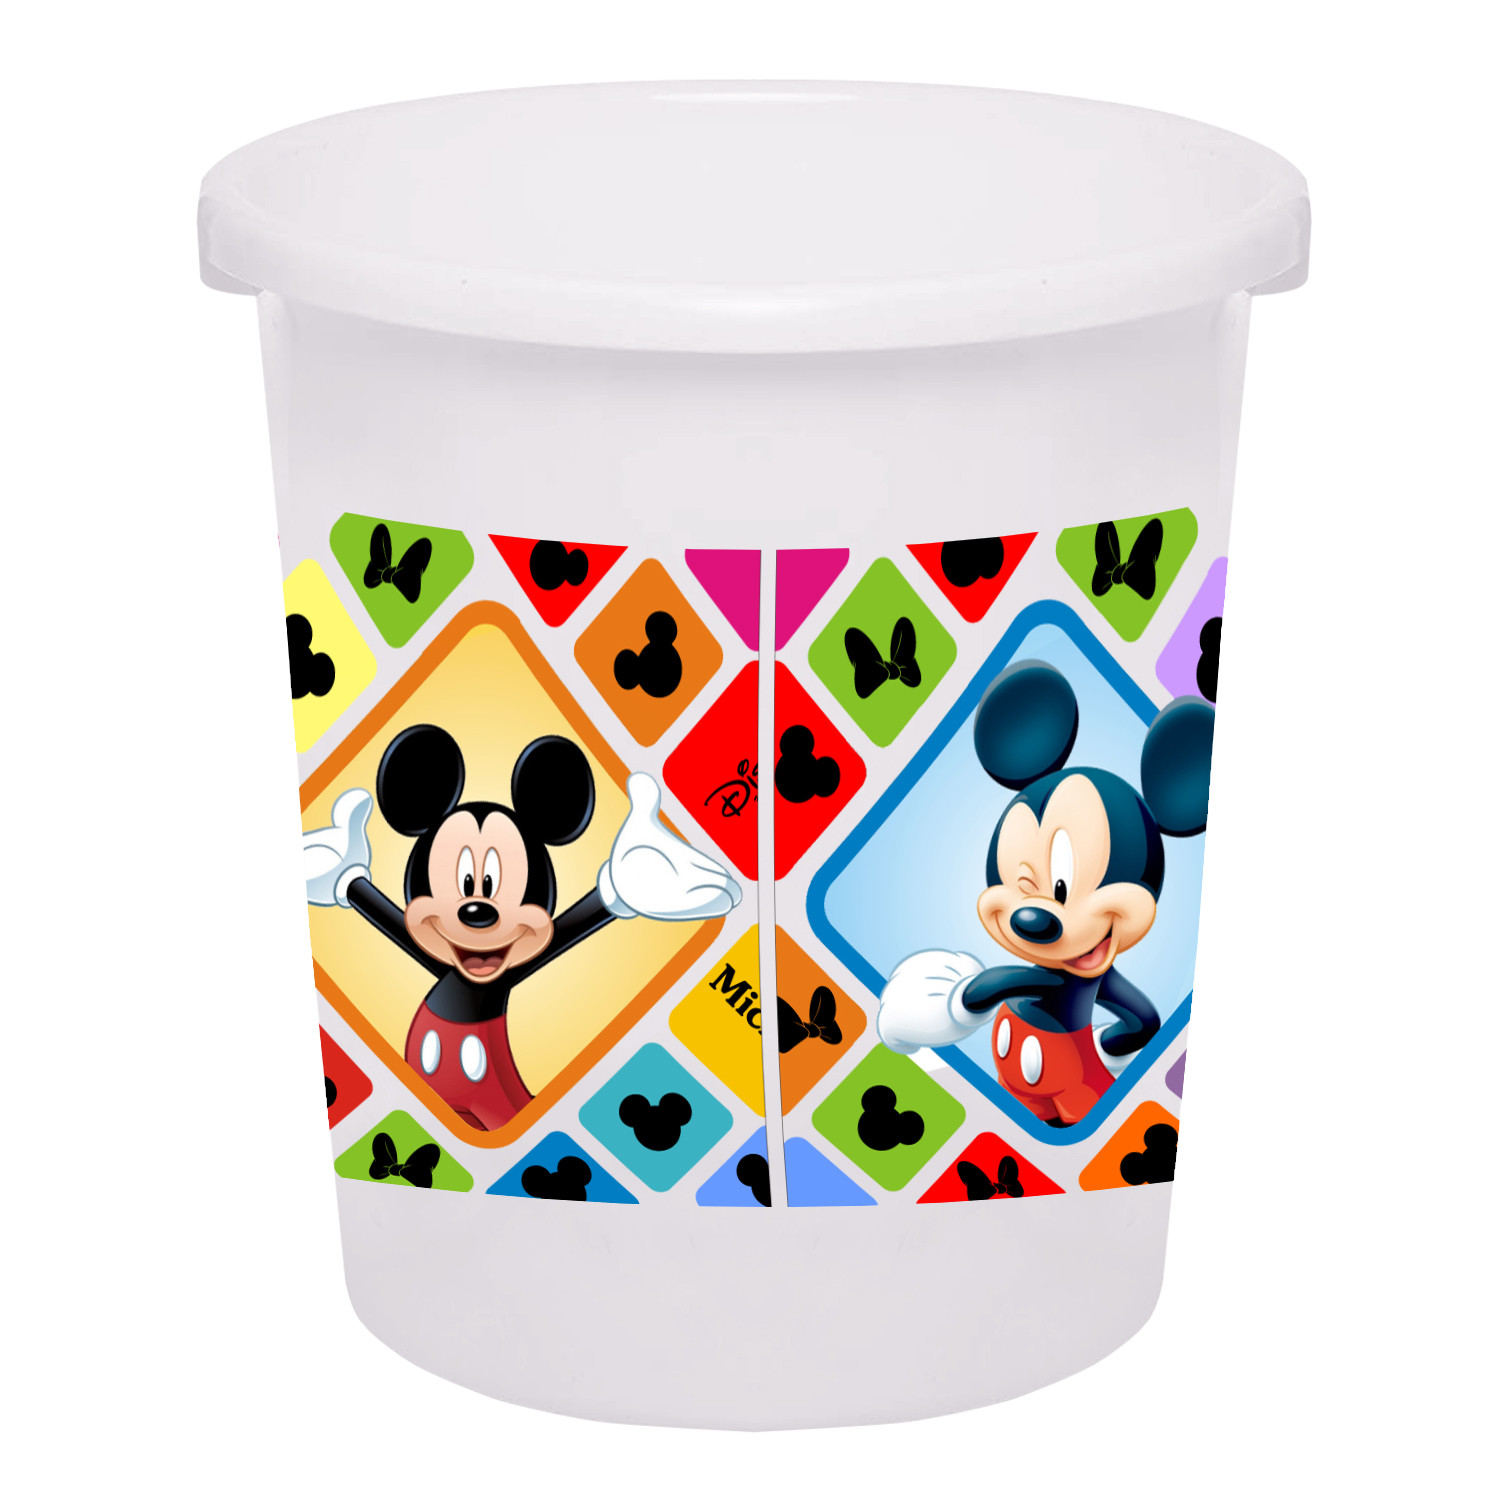 Kuber Industries Disney Mickey Minnie Print Plastic 3 Pieces Garbage Waste Dustbin/Recycling Bin for Home, Office, Factory, 5 Liters (Blue & Black & White) -HS_35_KUBMART17815